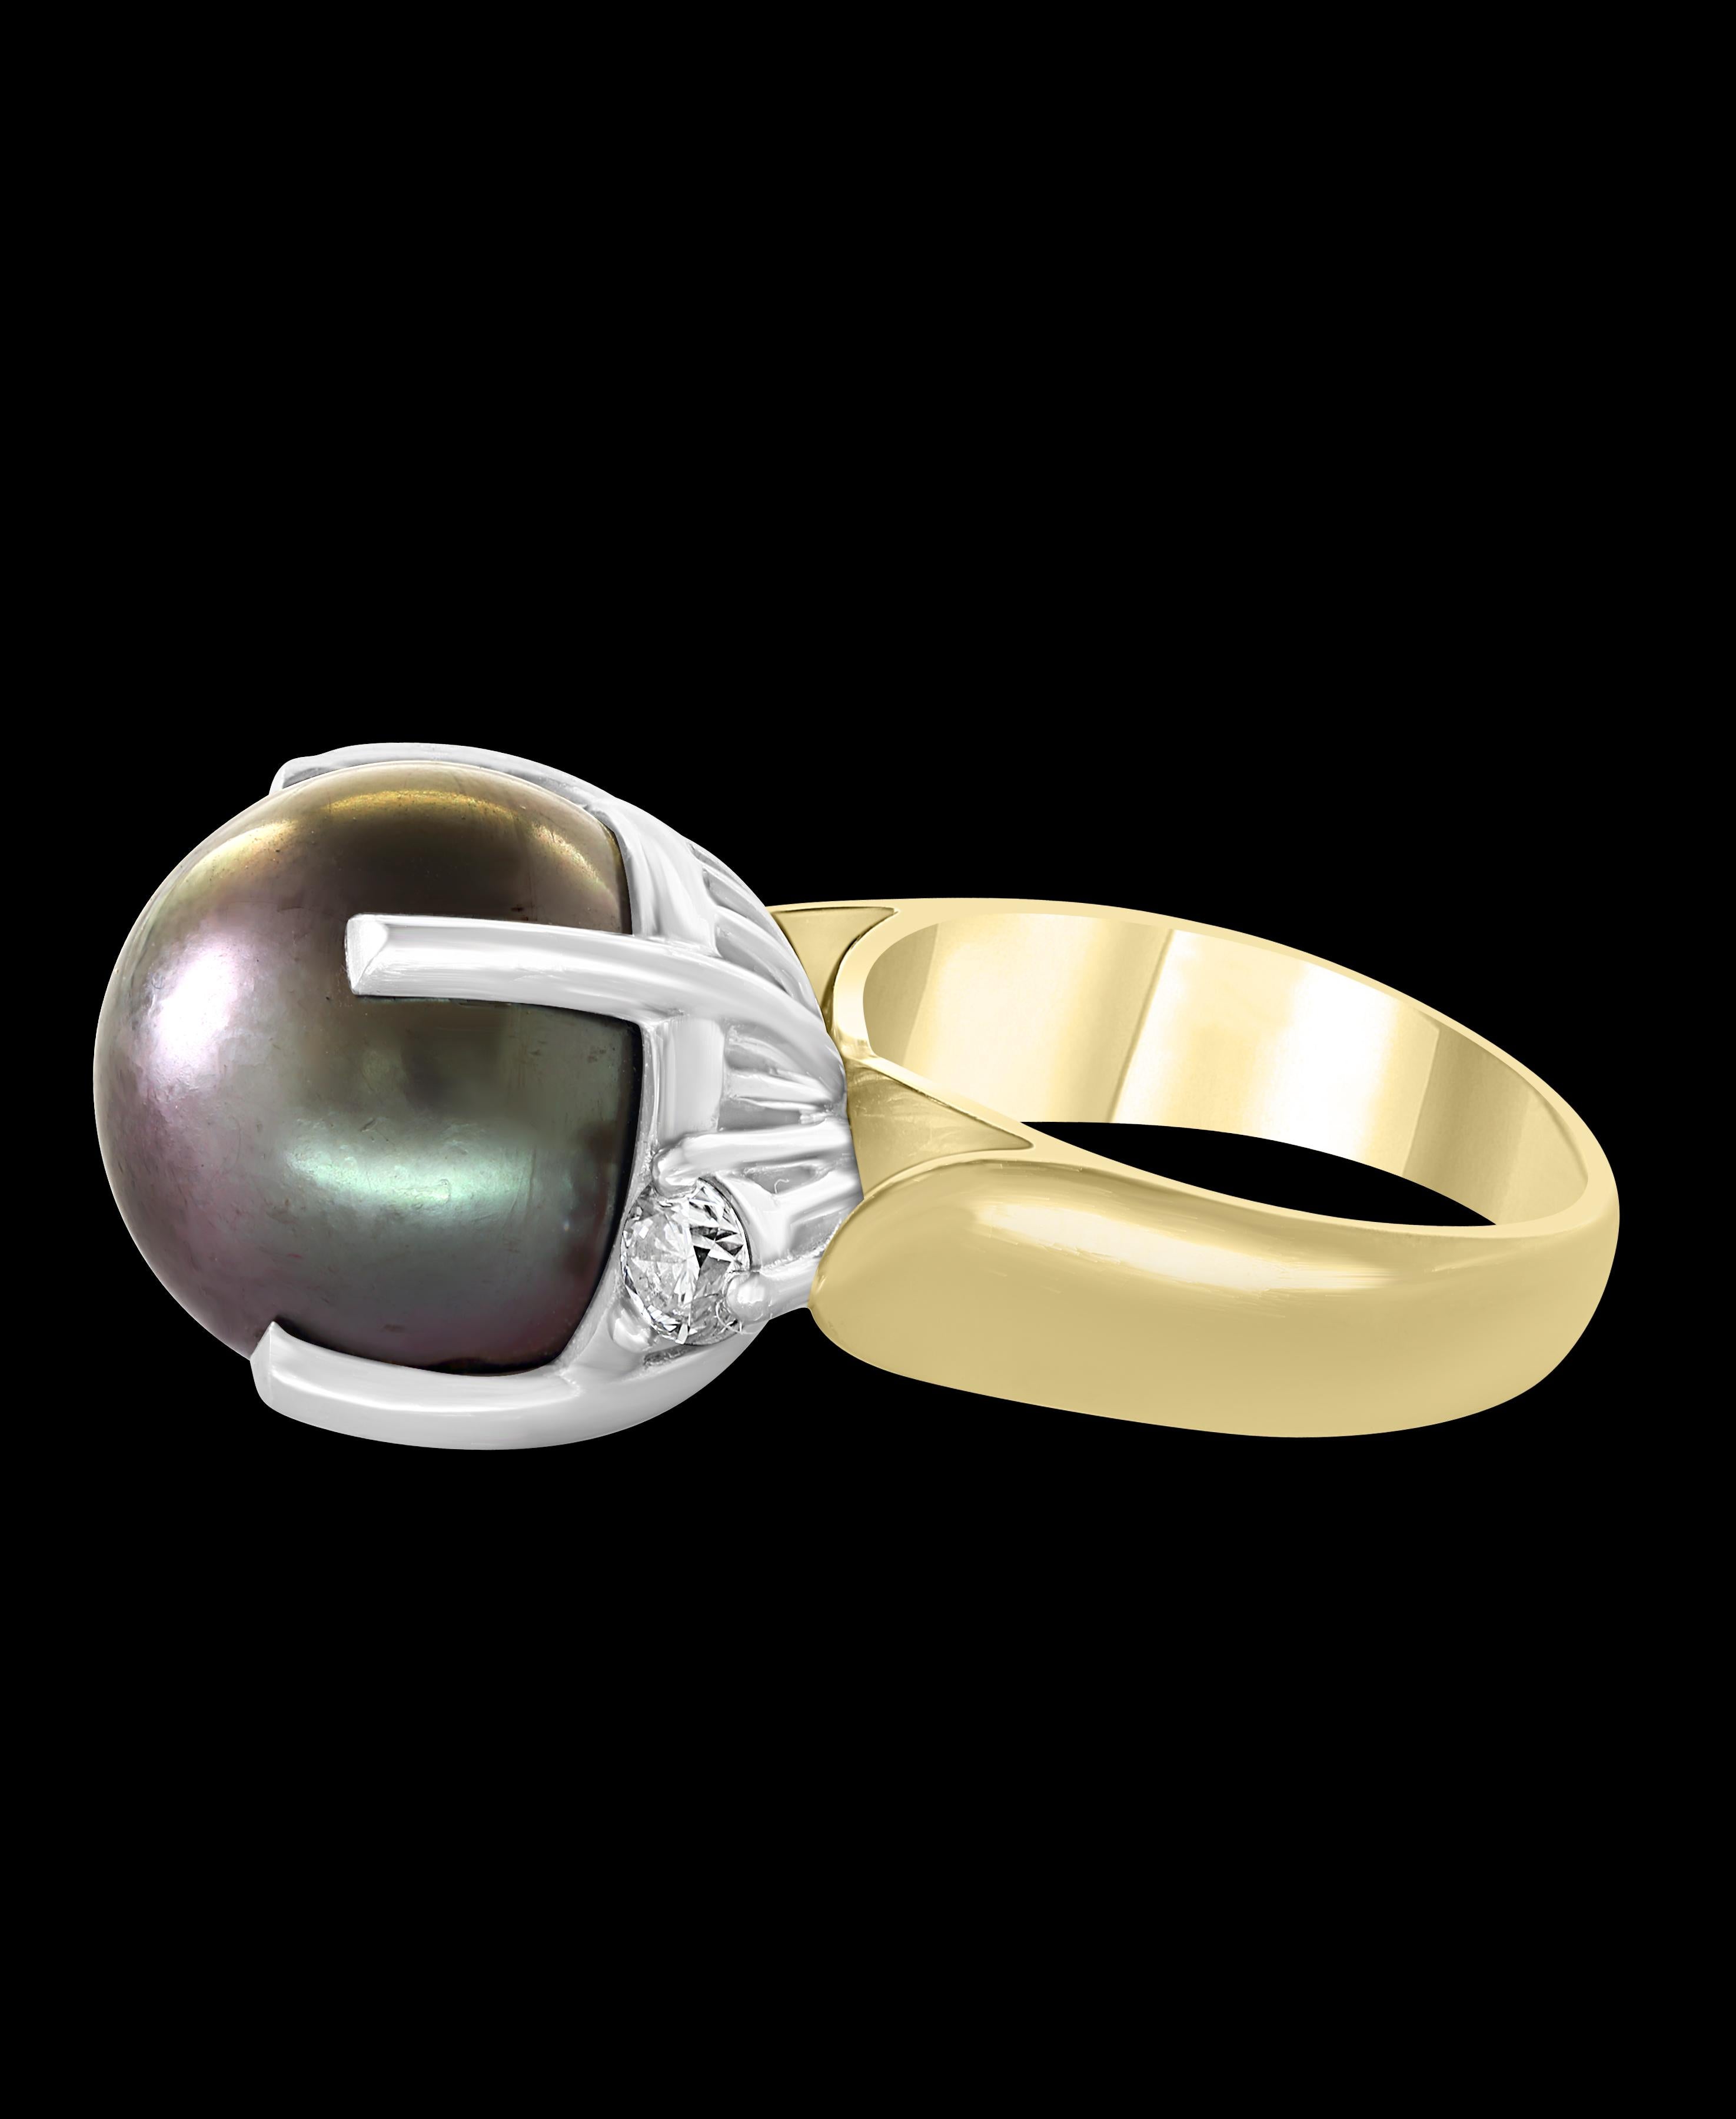 16 mm large Round Black Tahitian  Pearl  & Diamond Cocktail Ring  18 Karat White Gold and Platinum , stamped on the ring 
A classic, Cocktail ring 
Huge 16 mm Pearl very clean , in round shape , full of luster and shine  .
2 pieces of brilliant